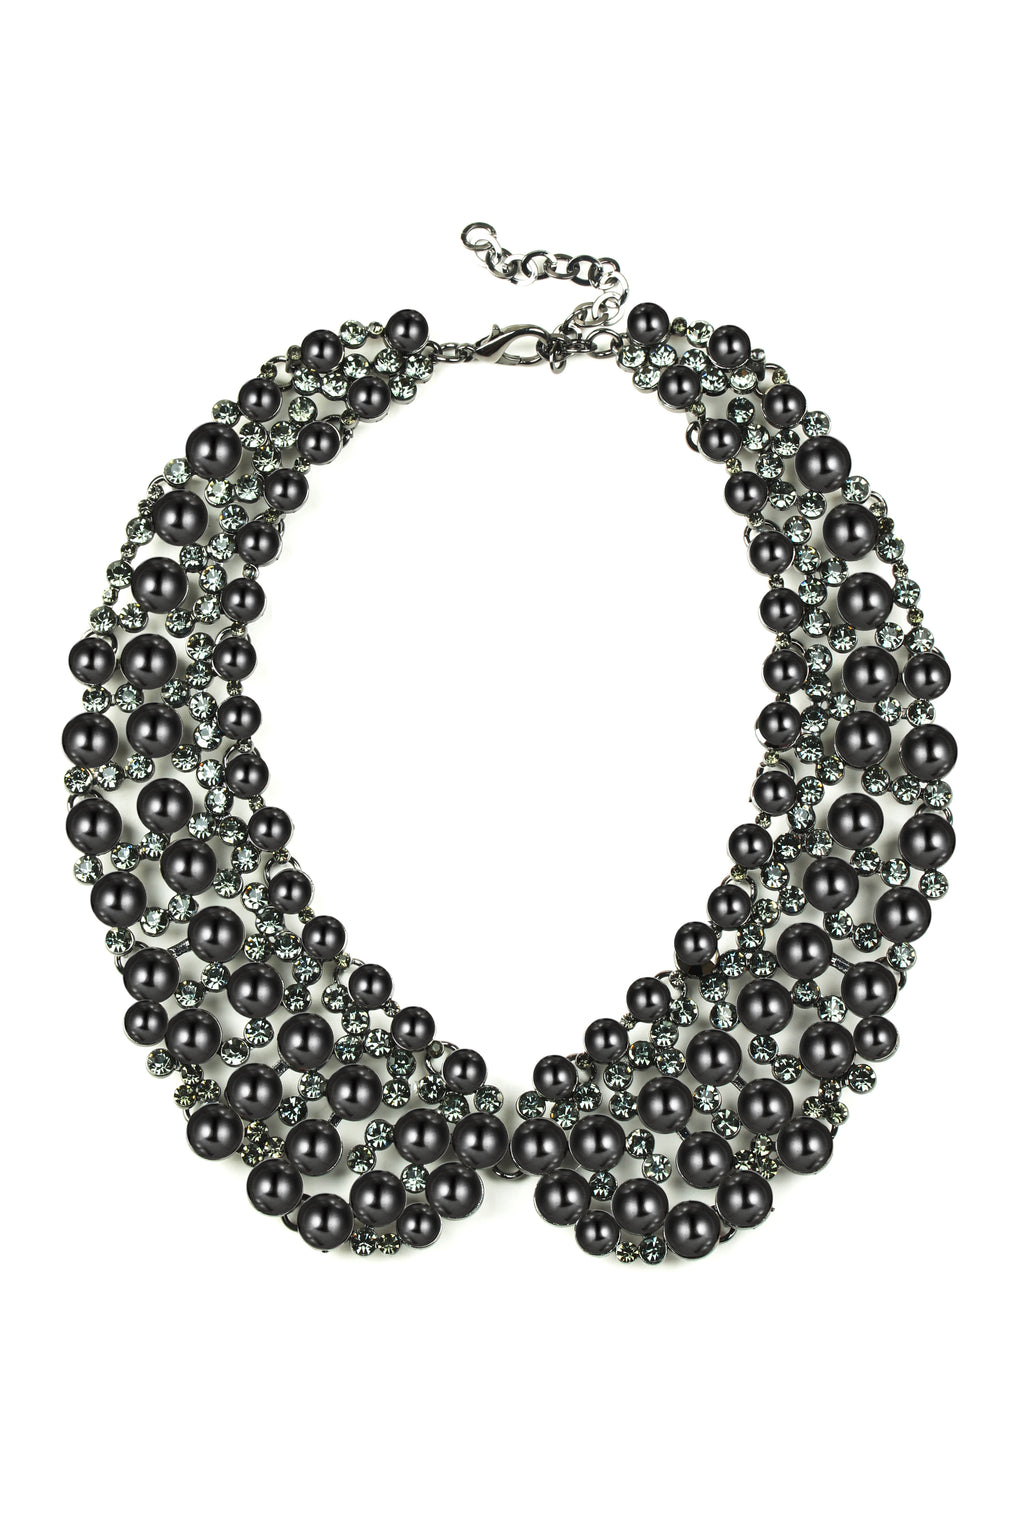 Black glass pearl statement collar necklace.